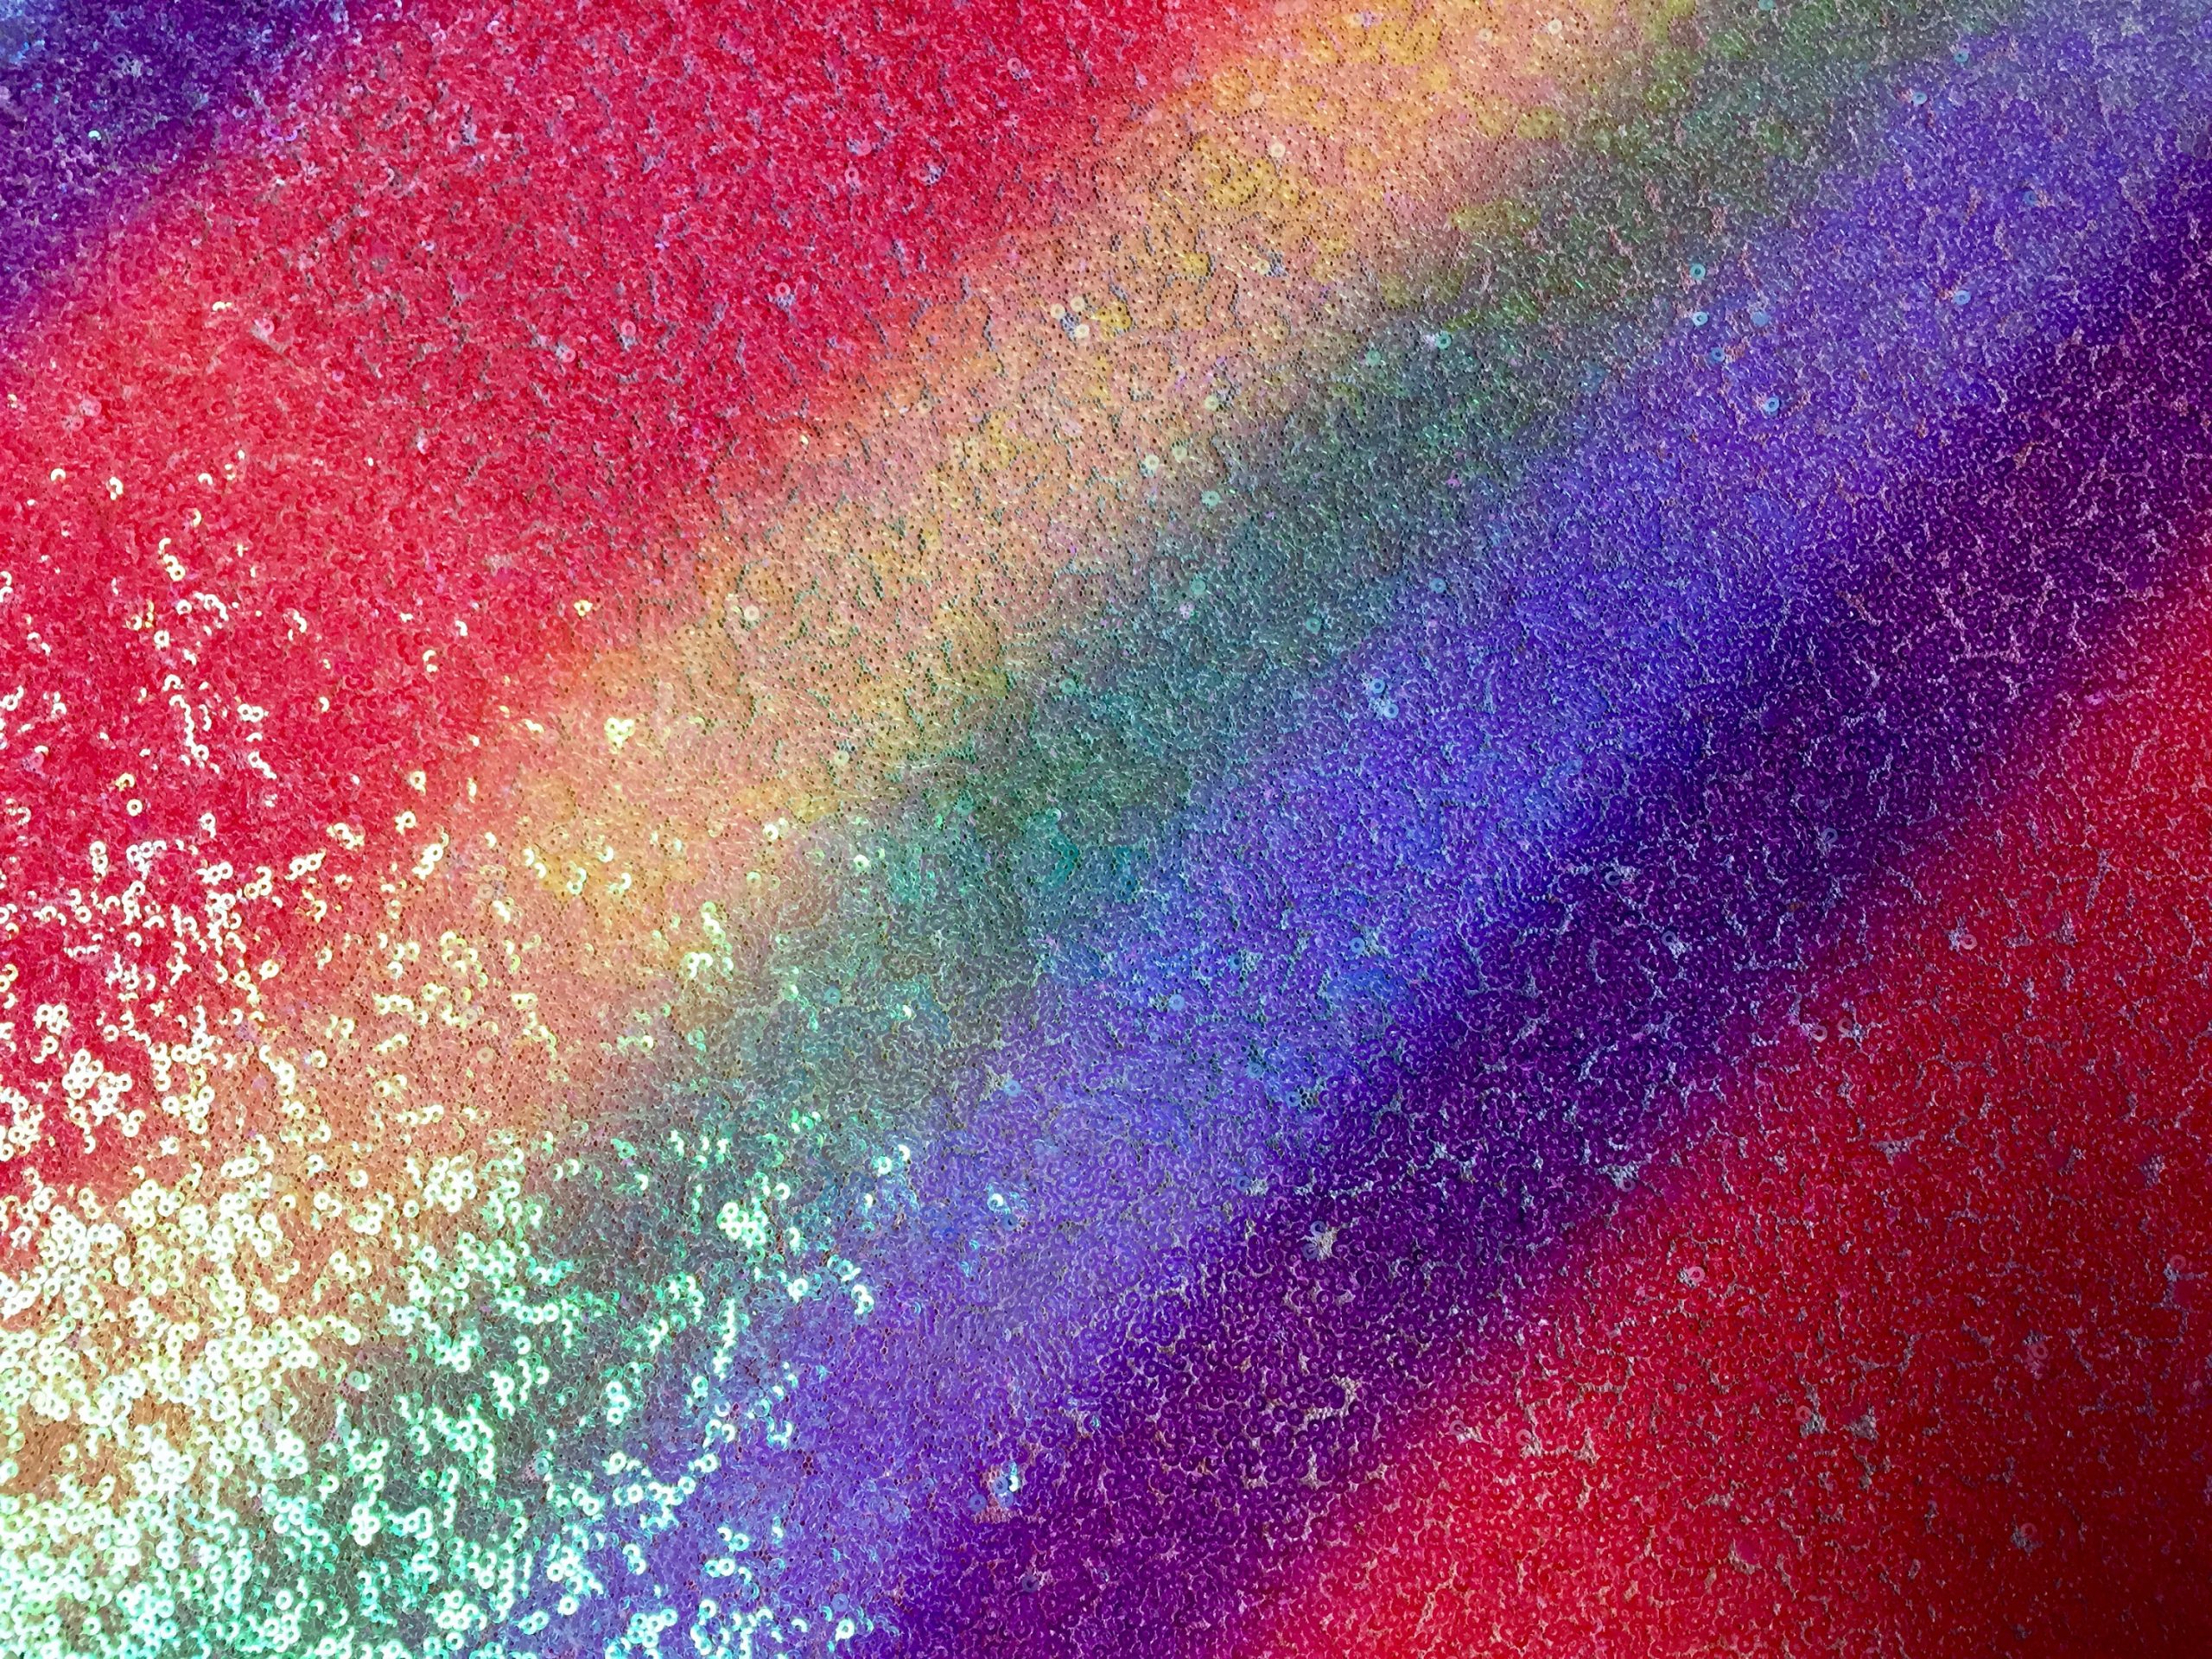 https://lushfabric.com/wp-content/uploads/2020/07/3mm-sparkling-gay-pride-striped-rainbow-sequins-material-2-way-stretch-fish-scales-fabric-for-masks-carnival-crafts-51-130cm-wide-5f0705b2-scaled.jpg